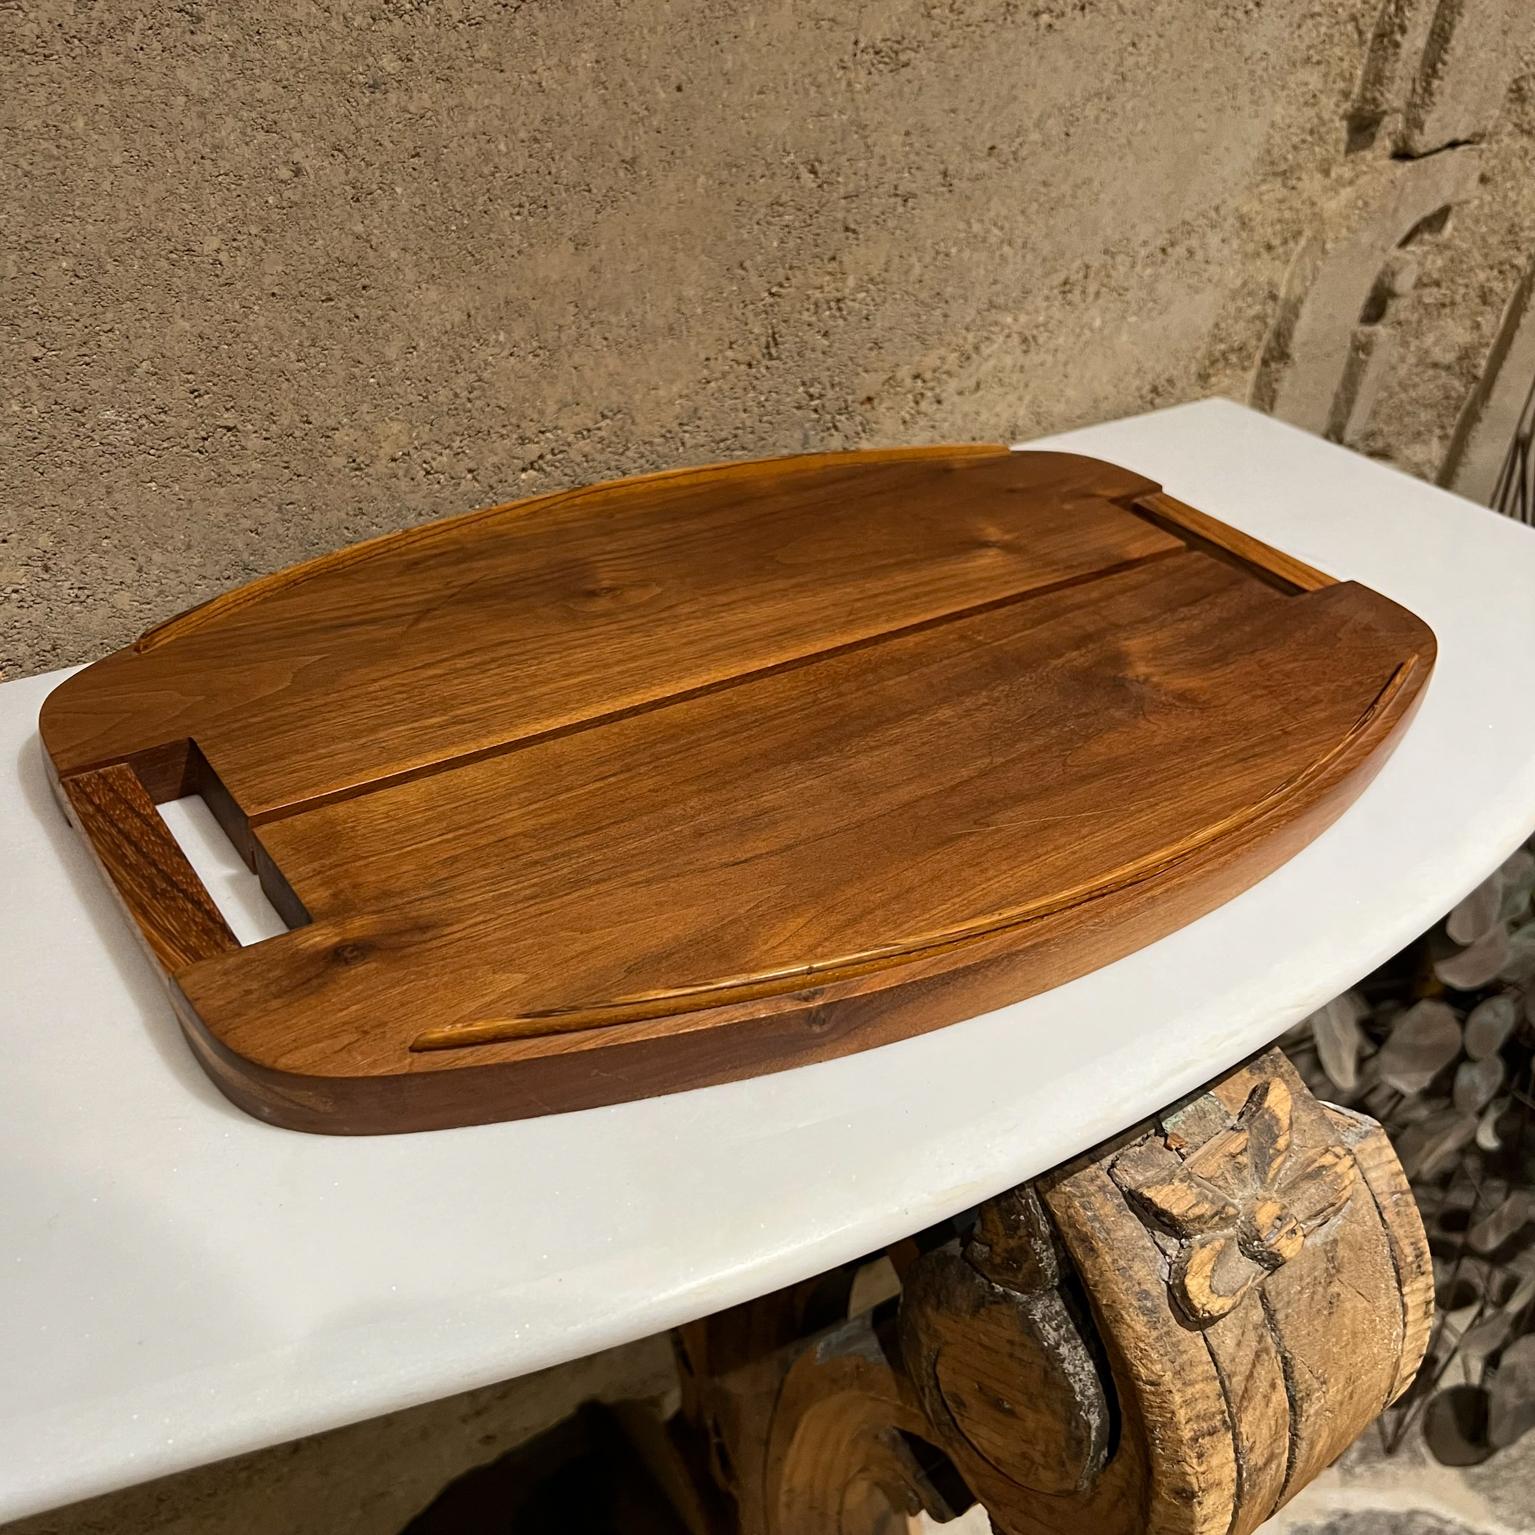 1970s Fancy Wood Cutting Board Modern Charcuterie Serving Platter In Good Condition For Sale In Chula Vista, CA